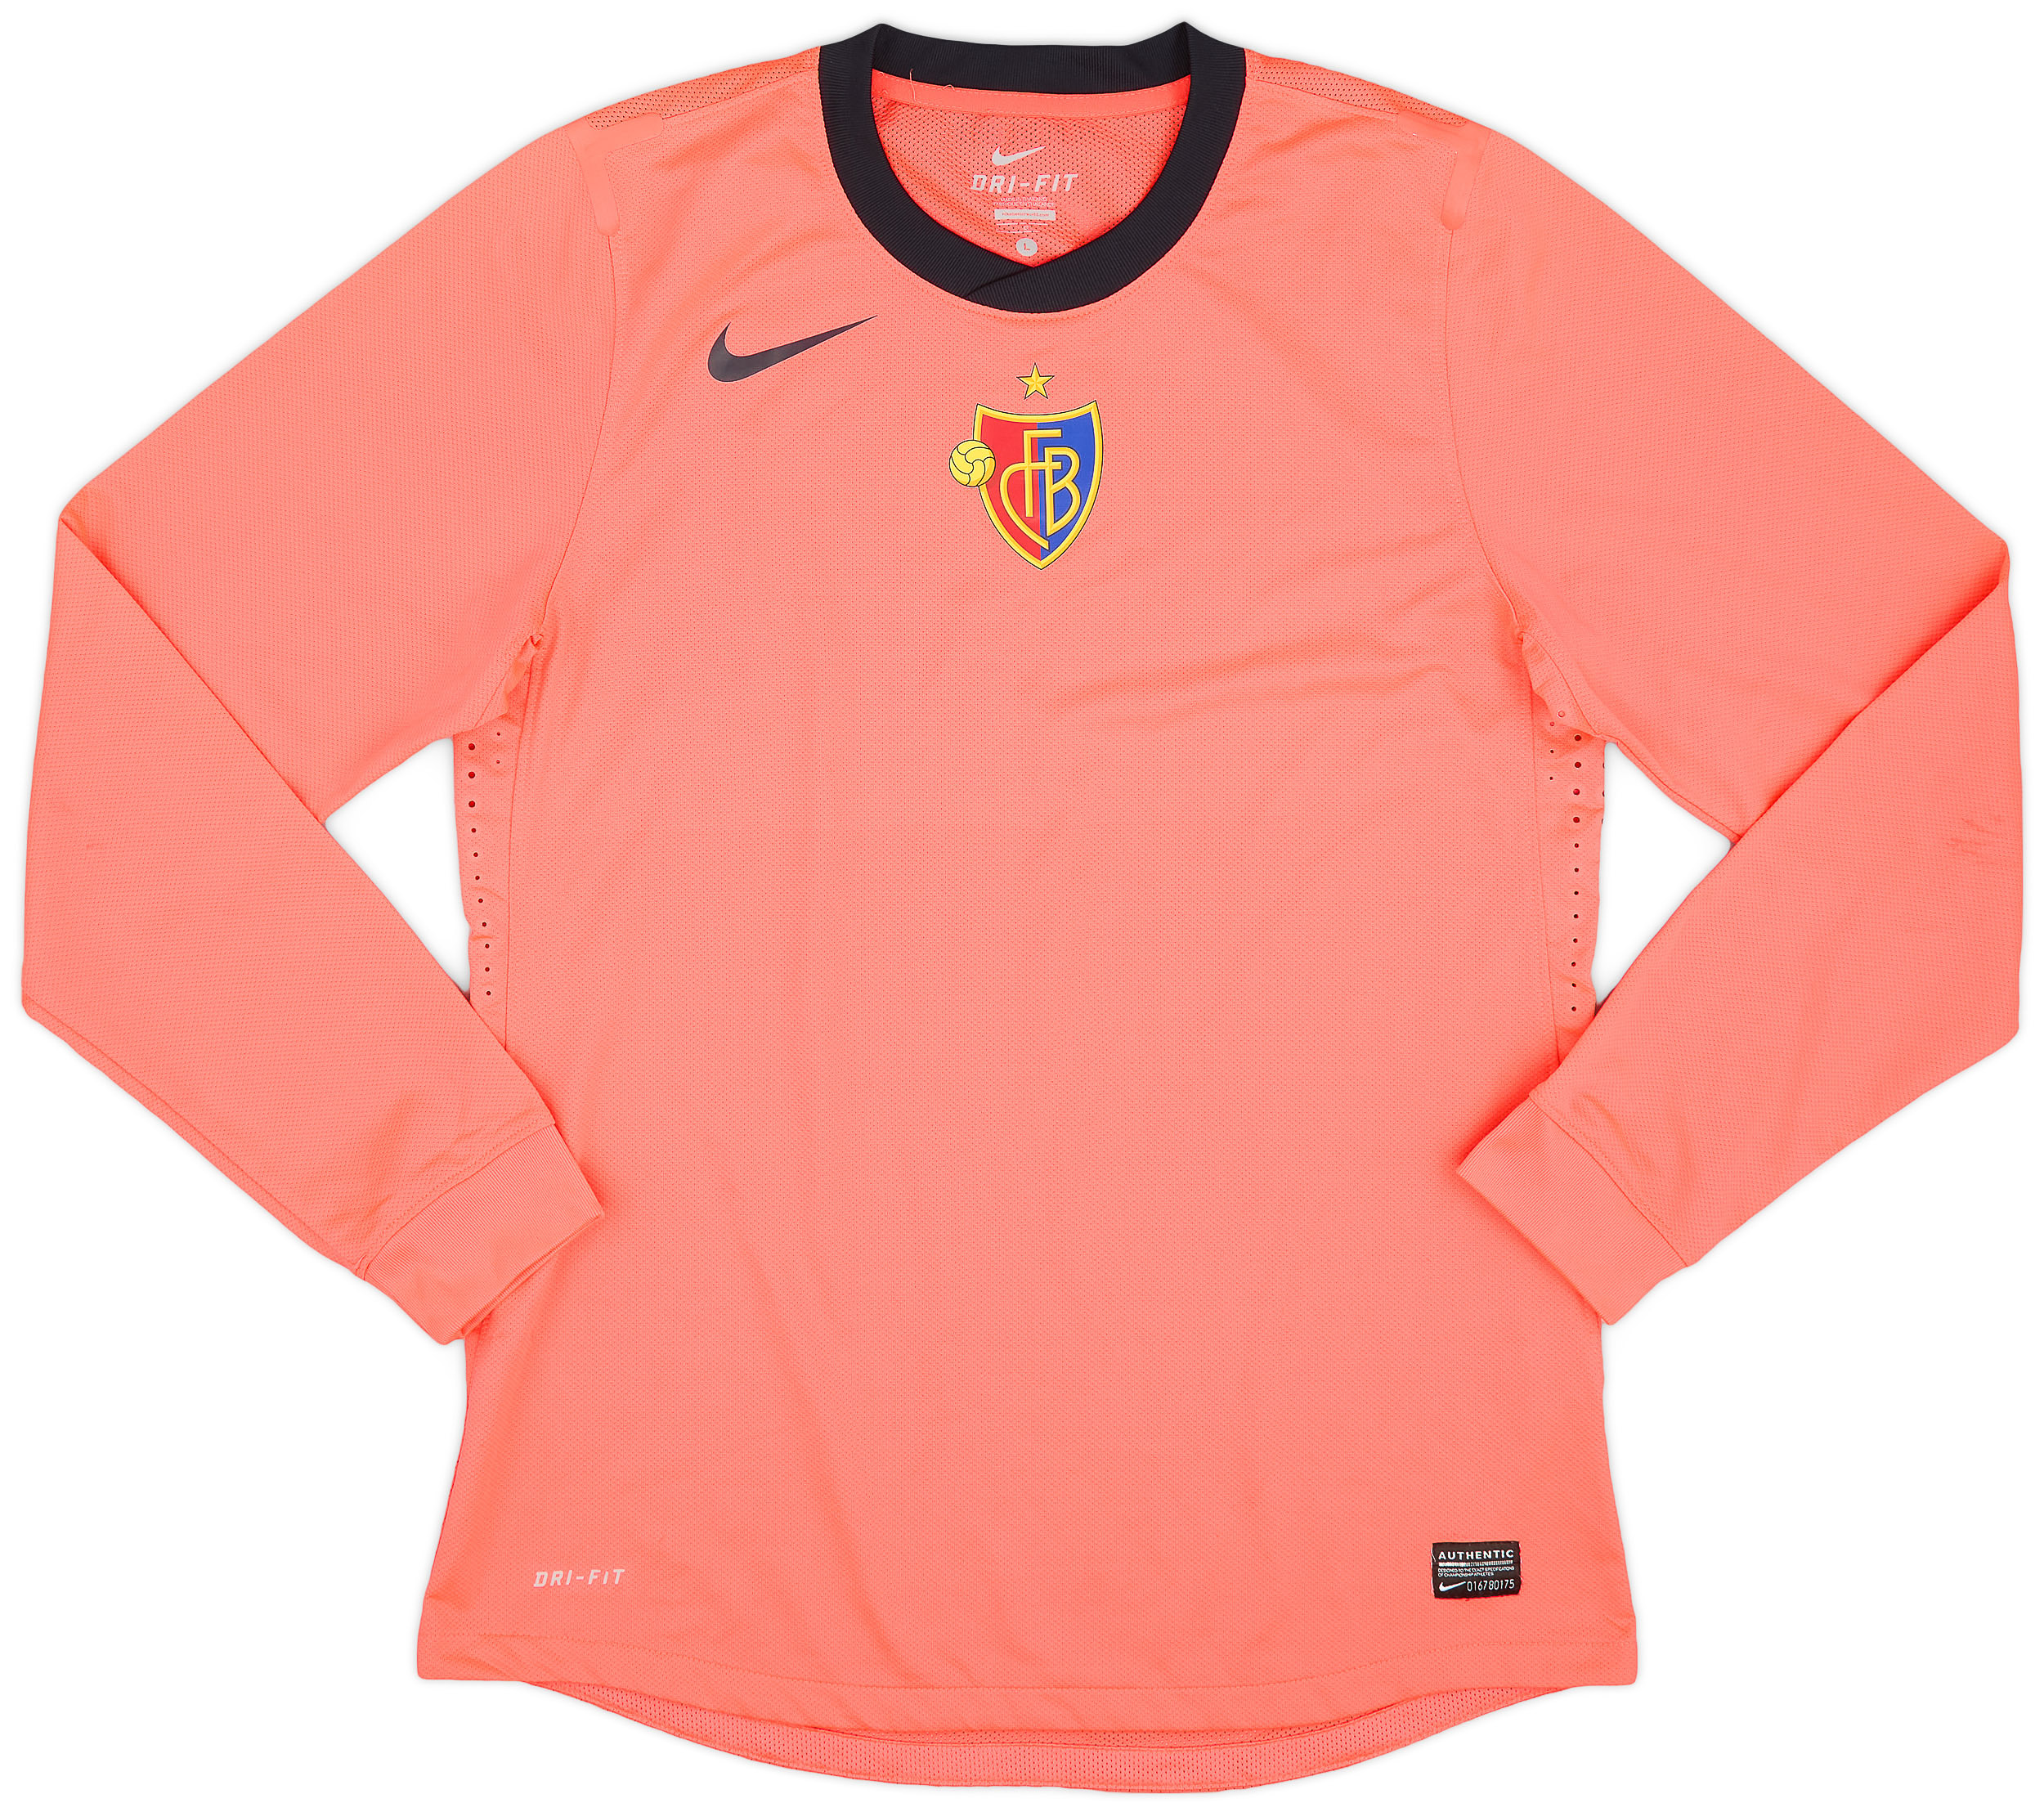 2011-12 FC Basel Player Issue Away Shirt - 9/10 - ()